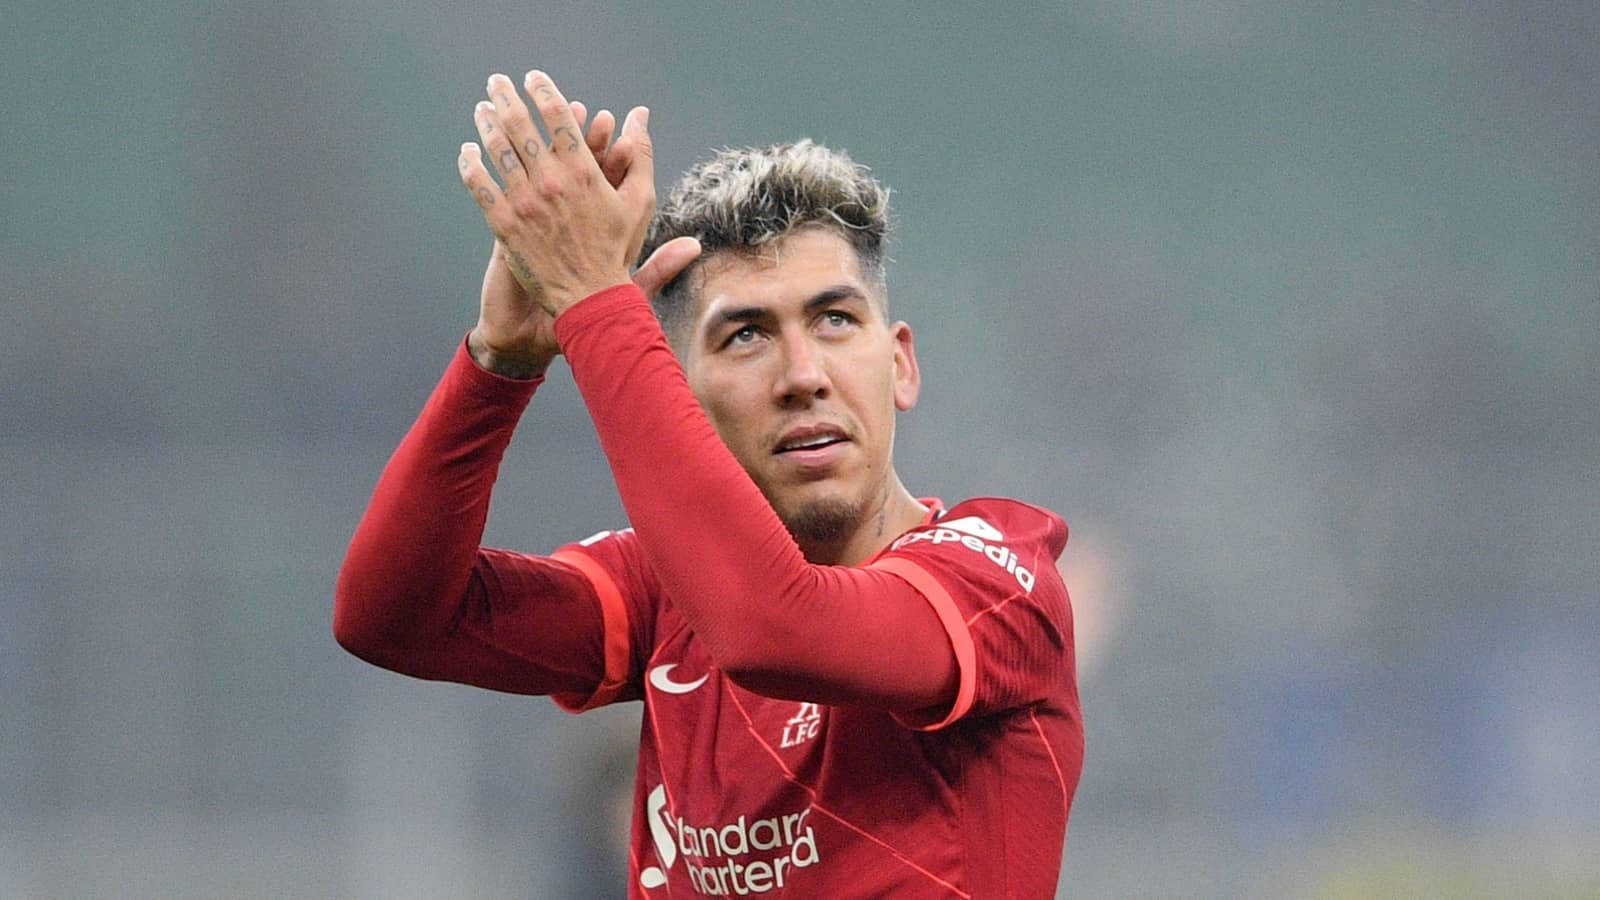 Liverpool Striker Roberto Firmino Applauding on the Pitch Wallpaper